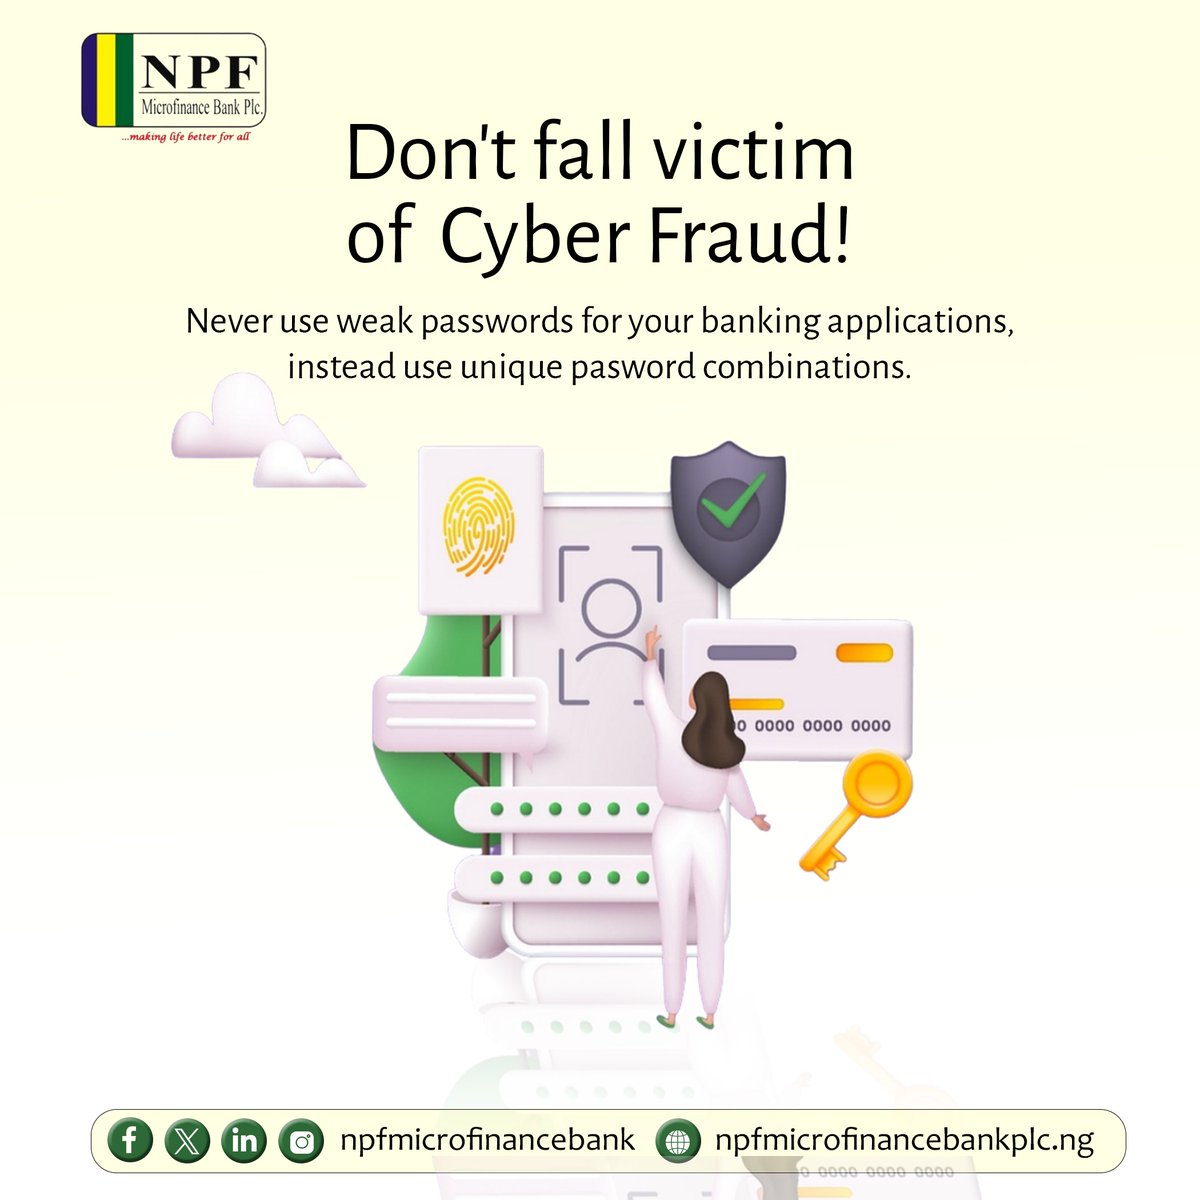 Protect yourself from cyber fraud! Strengthen your defenses by using strong, unique passwords for your banking apps. Stay one step ahead of hackers! 

#NPFMFB #CyberSecurity #StaySafeOnline #cyberthreats